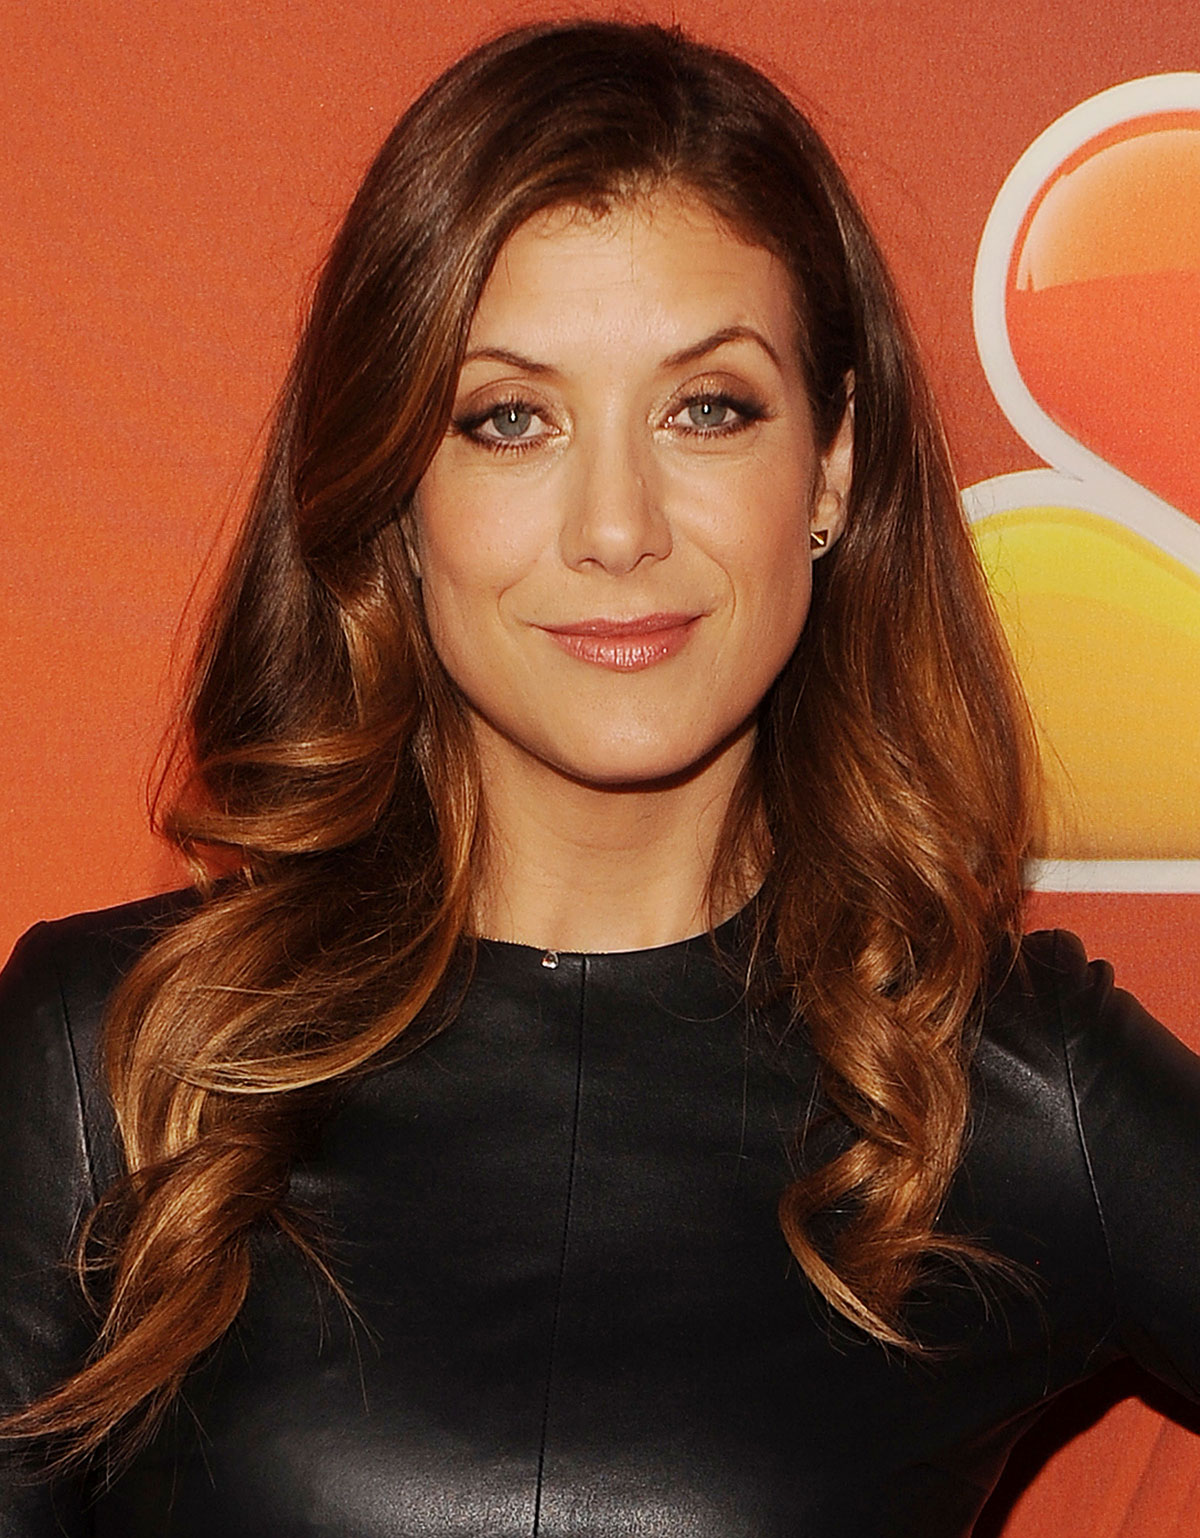 Kate Walsh attends the 2014 NBC Upfront Presentation